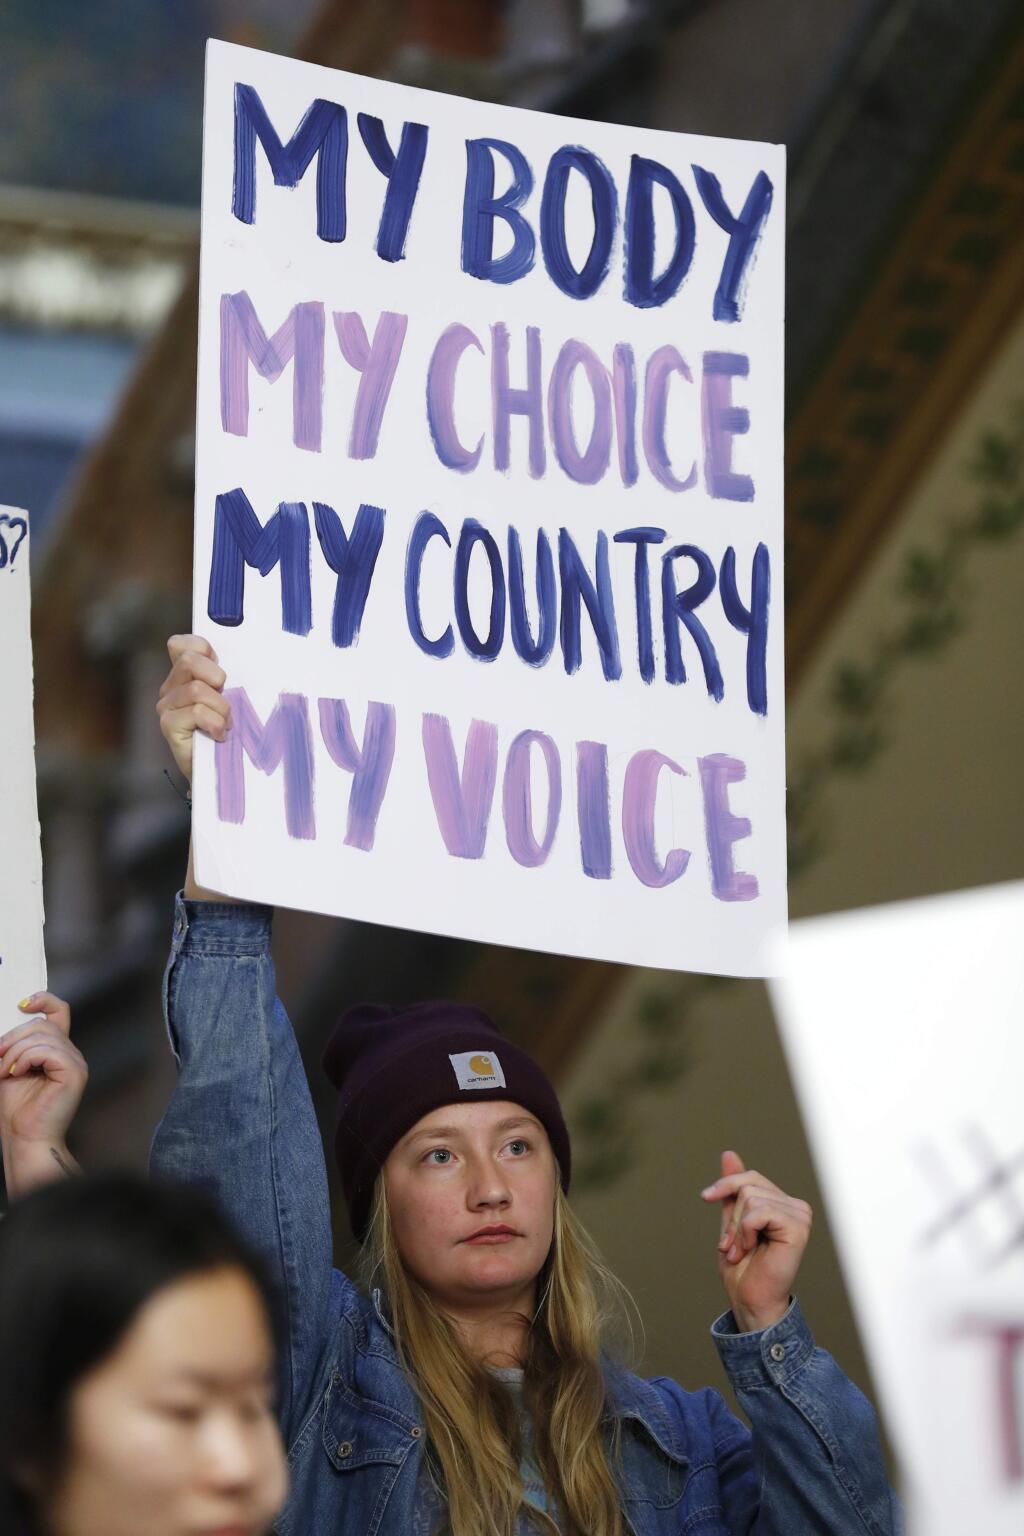 Tevka Lackmann, of Norwalk, Iowa, holds a sign during a rally to protest recent abortion bans, Tuesday, May 21, 2019, at the Statehouse in Des Moines, Iowa. (AP Photo/Charlie Neibergall)